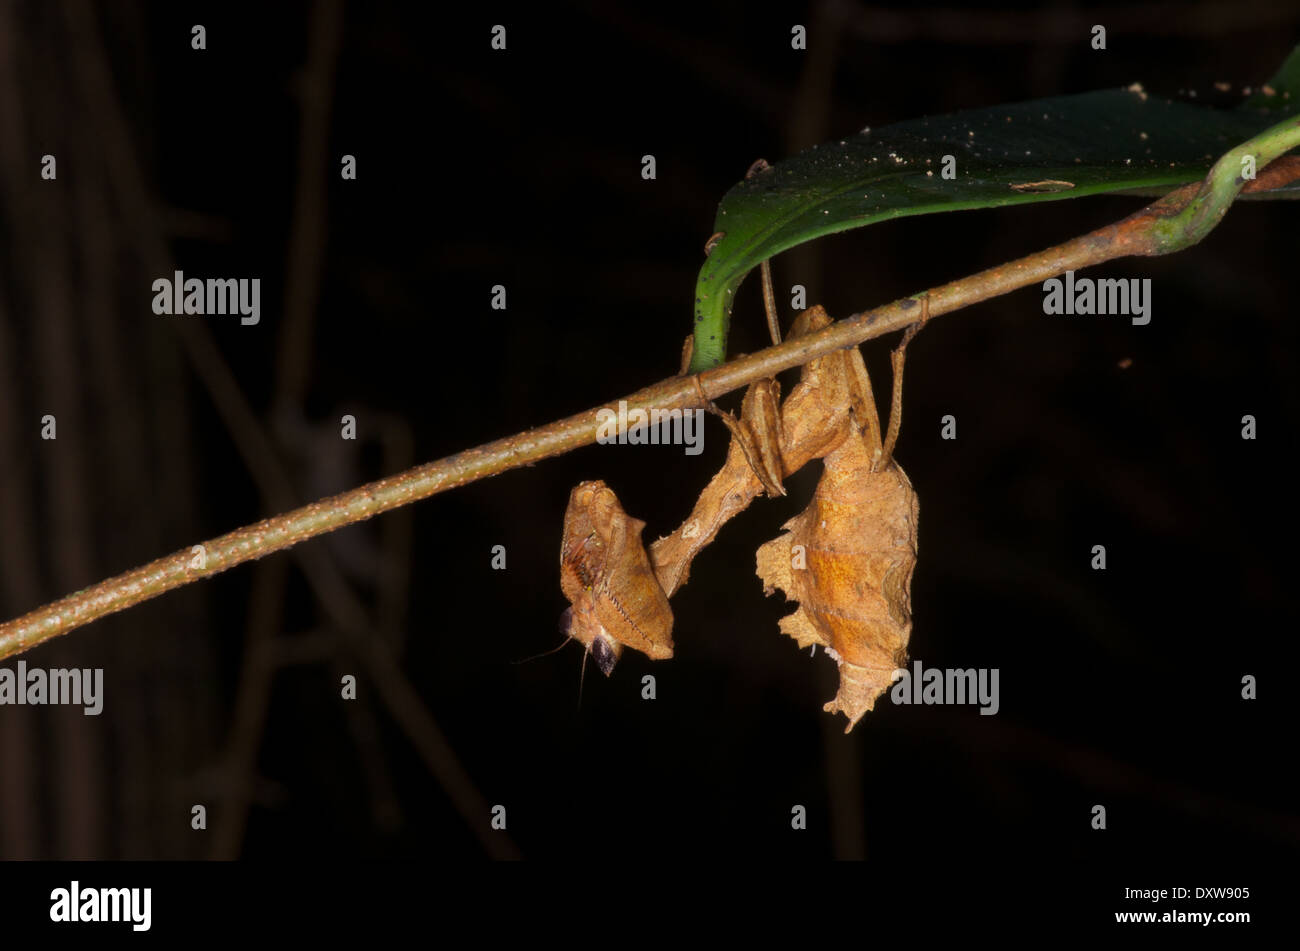 A leaf mimic praying mantis (Acanthops sp.) hangs in wait upside-down on a twig at night in the Amazon basin in Peru. Stock Photo